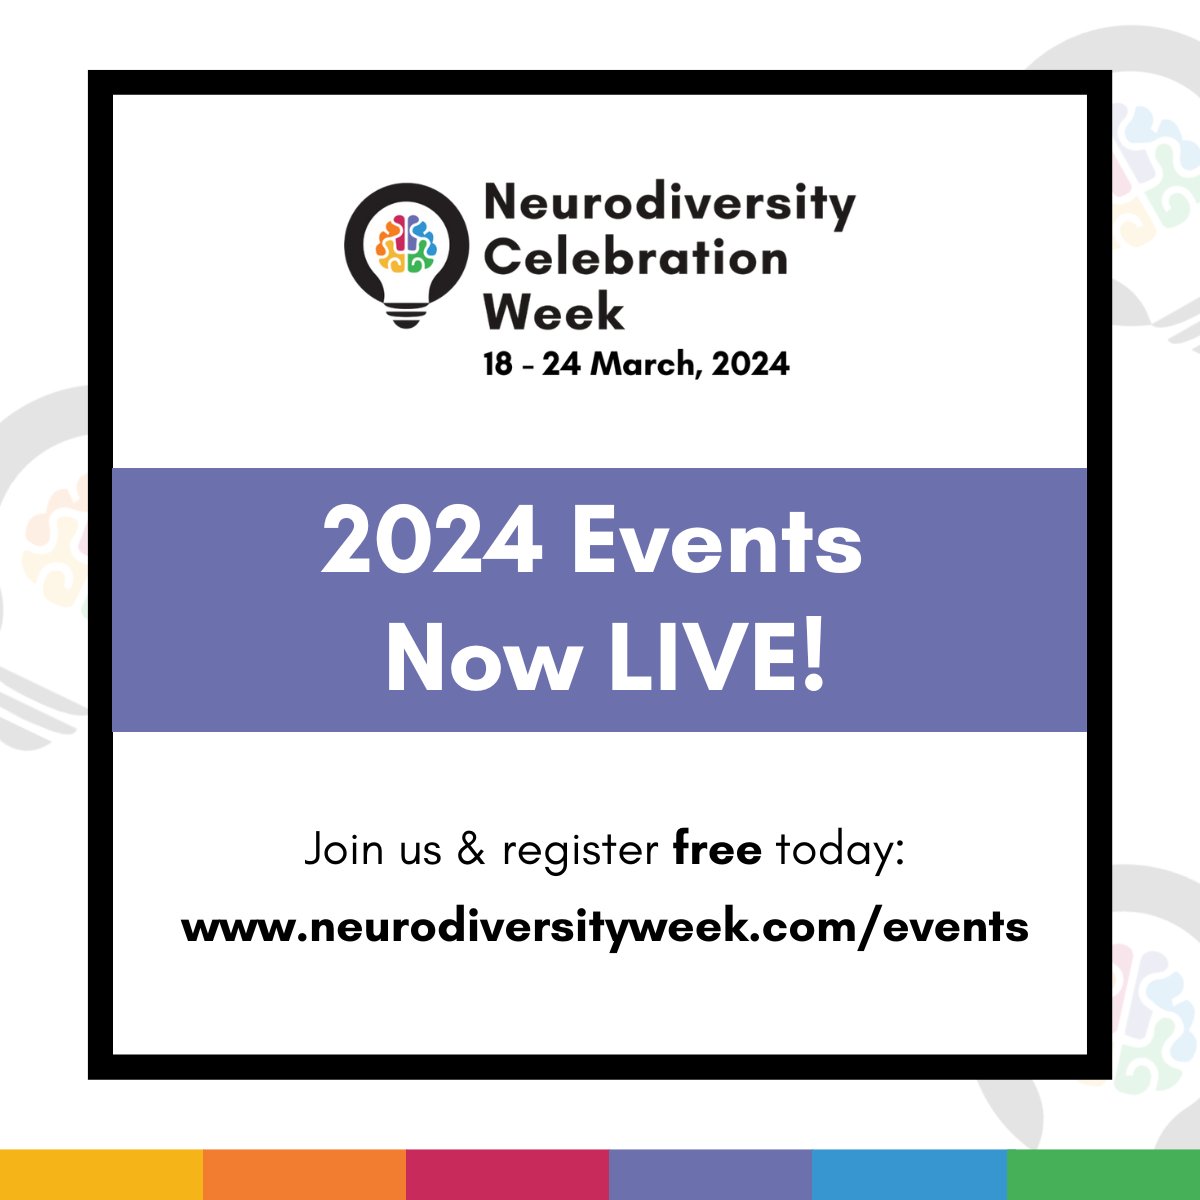 With less than 6 weeks to go until #NeurodiversityCelebrationWeek 2024, we are excited to share that our events schedule is now LIVE! 🌟

See the full schedule & register now 🗓️
neurodiversityweek.com/events

#NeurodiversityWeek #NCW #ThisIsND #Neurodiversity #Neuroinclusion #Events